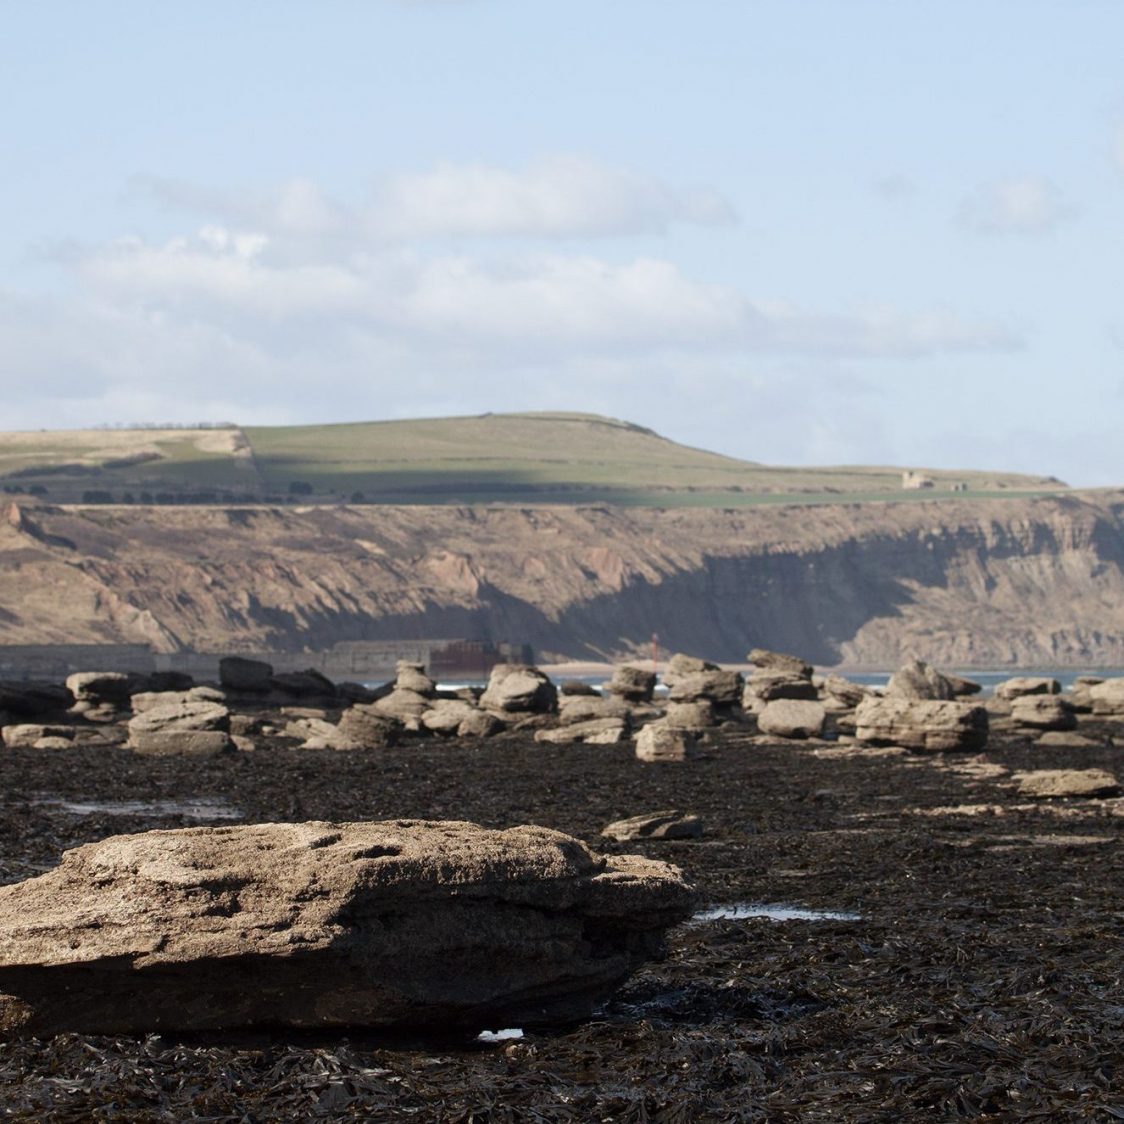 Photo of the foreshore at Hummersea. Large rocks emerge from an expanse of seaweed. The cliffs above Skinningrove are visible in the background.